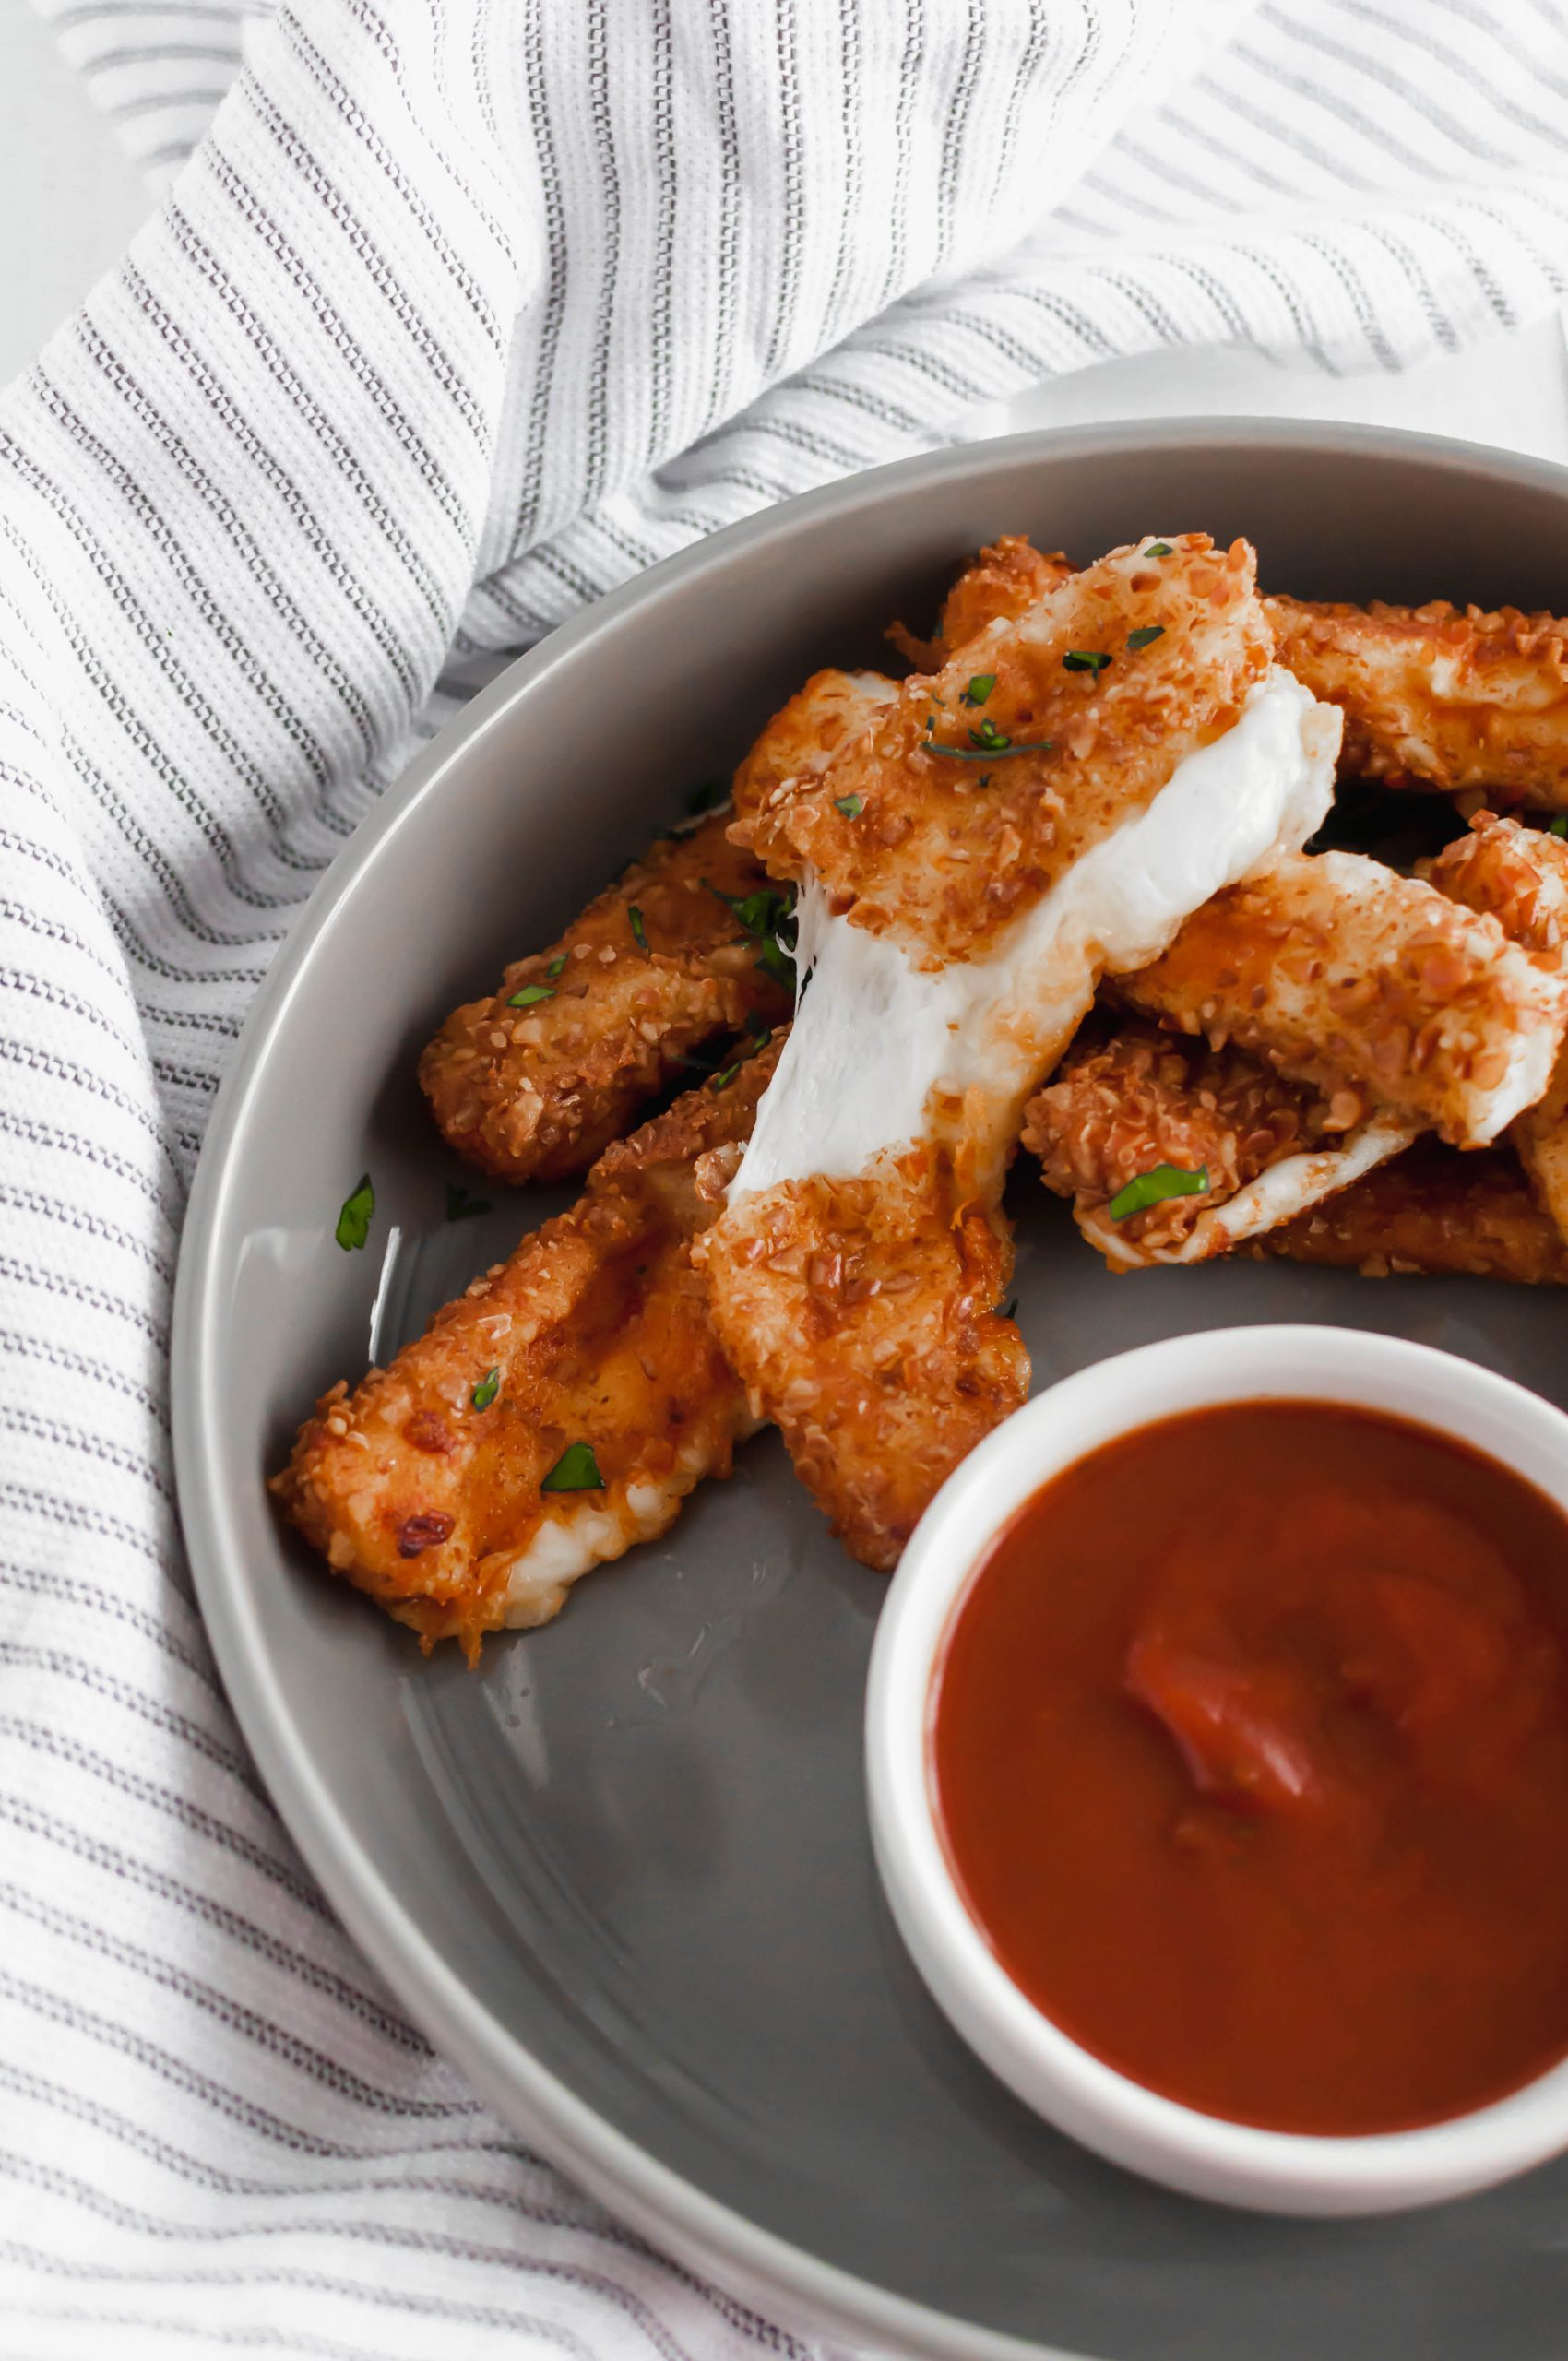 These Mozzarella Sticks with Pretzel Crumbs are the ultimate Super Bowl appetizer. Mozzarella cheese sticks covered in pretzels crumbs and fried to golden brown. Just look at that cheese pull.